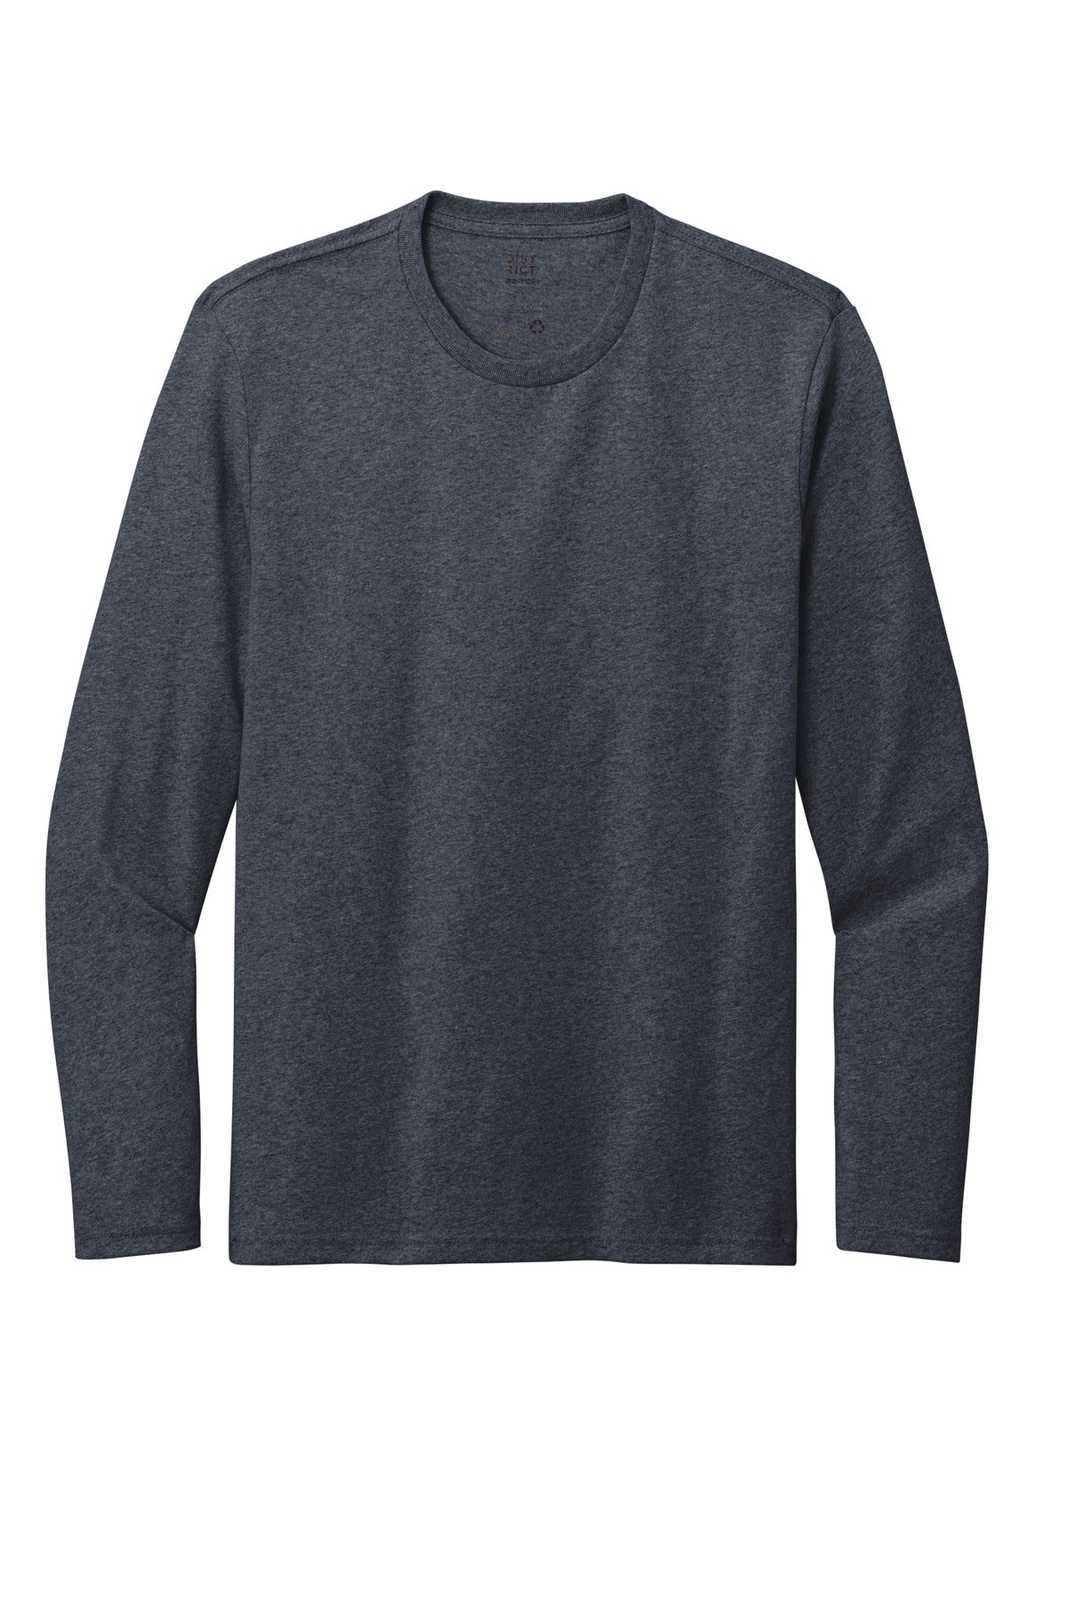 District DT8003 Re-Tee Long Sleeve - Heathered Navy - HIT a Double - 2